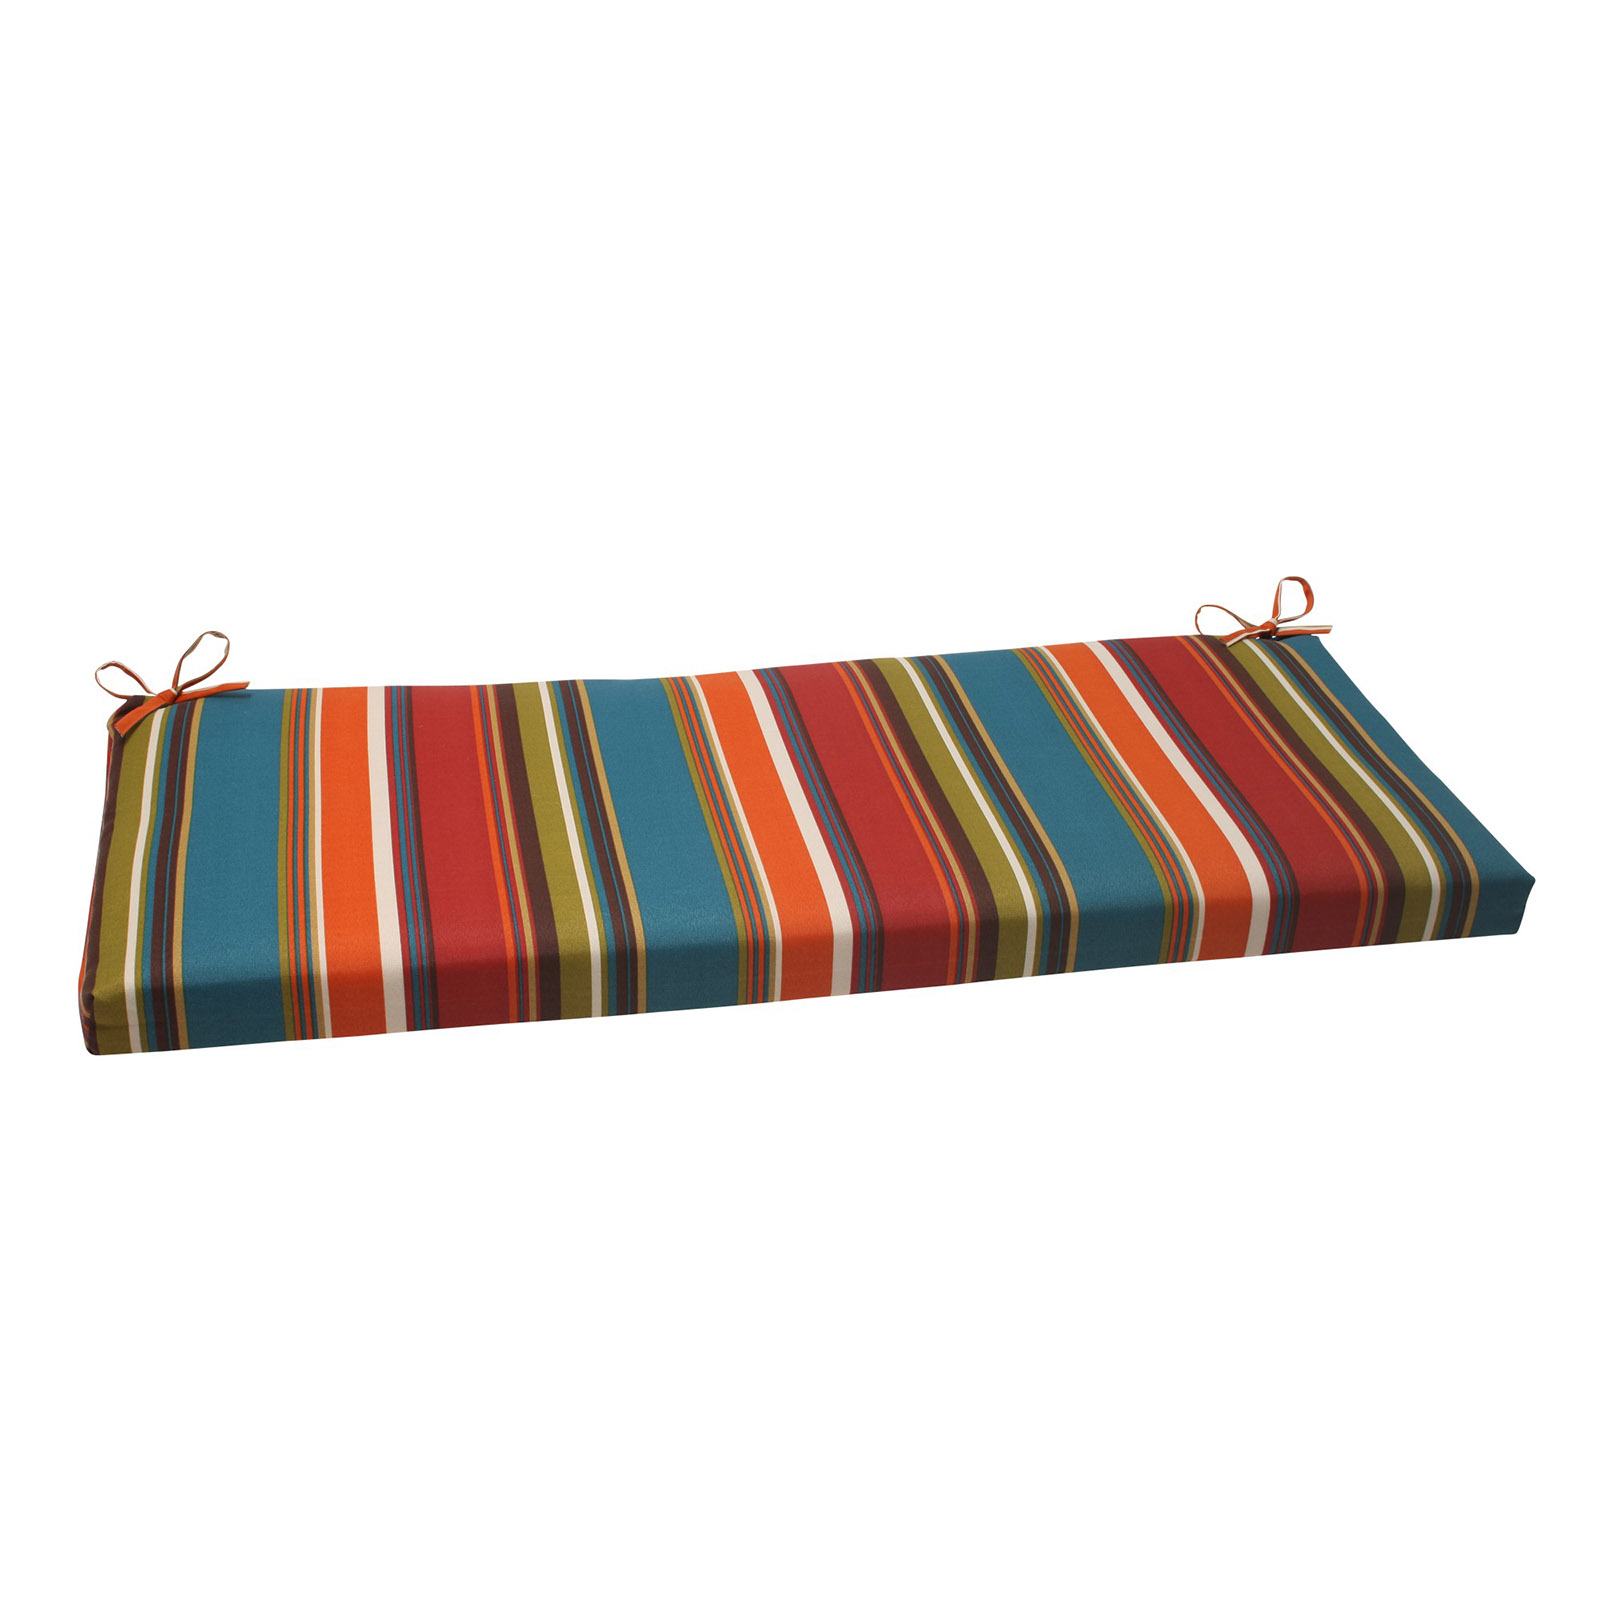 CC Outdoor Living 45" Striped Patio Bench Cushion - Multi-Color